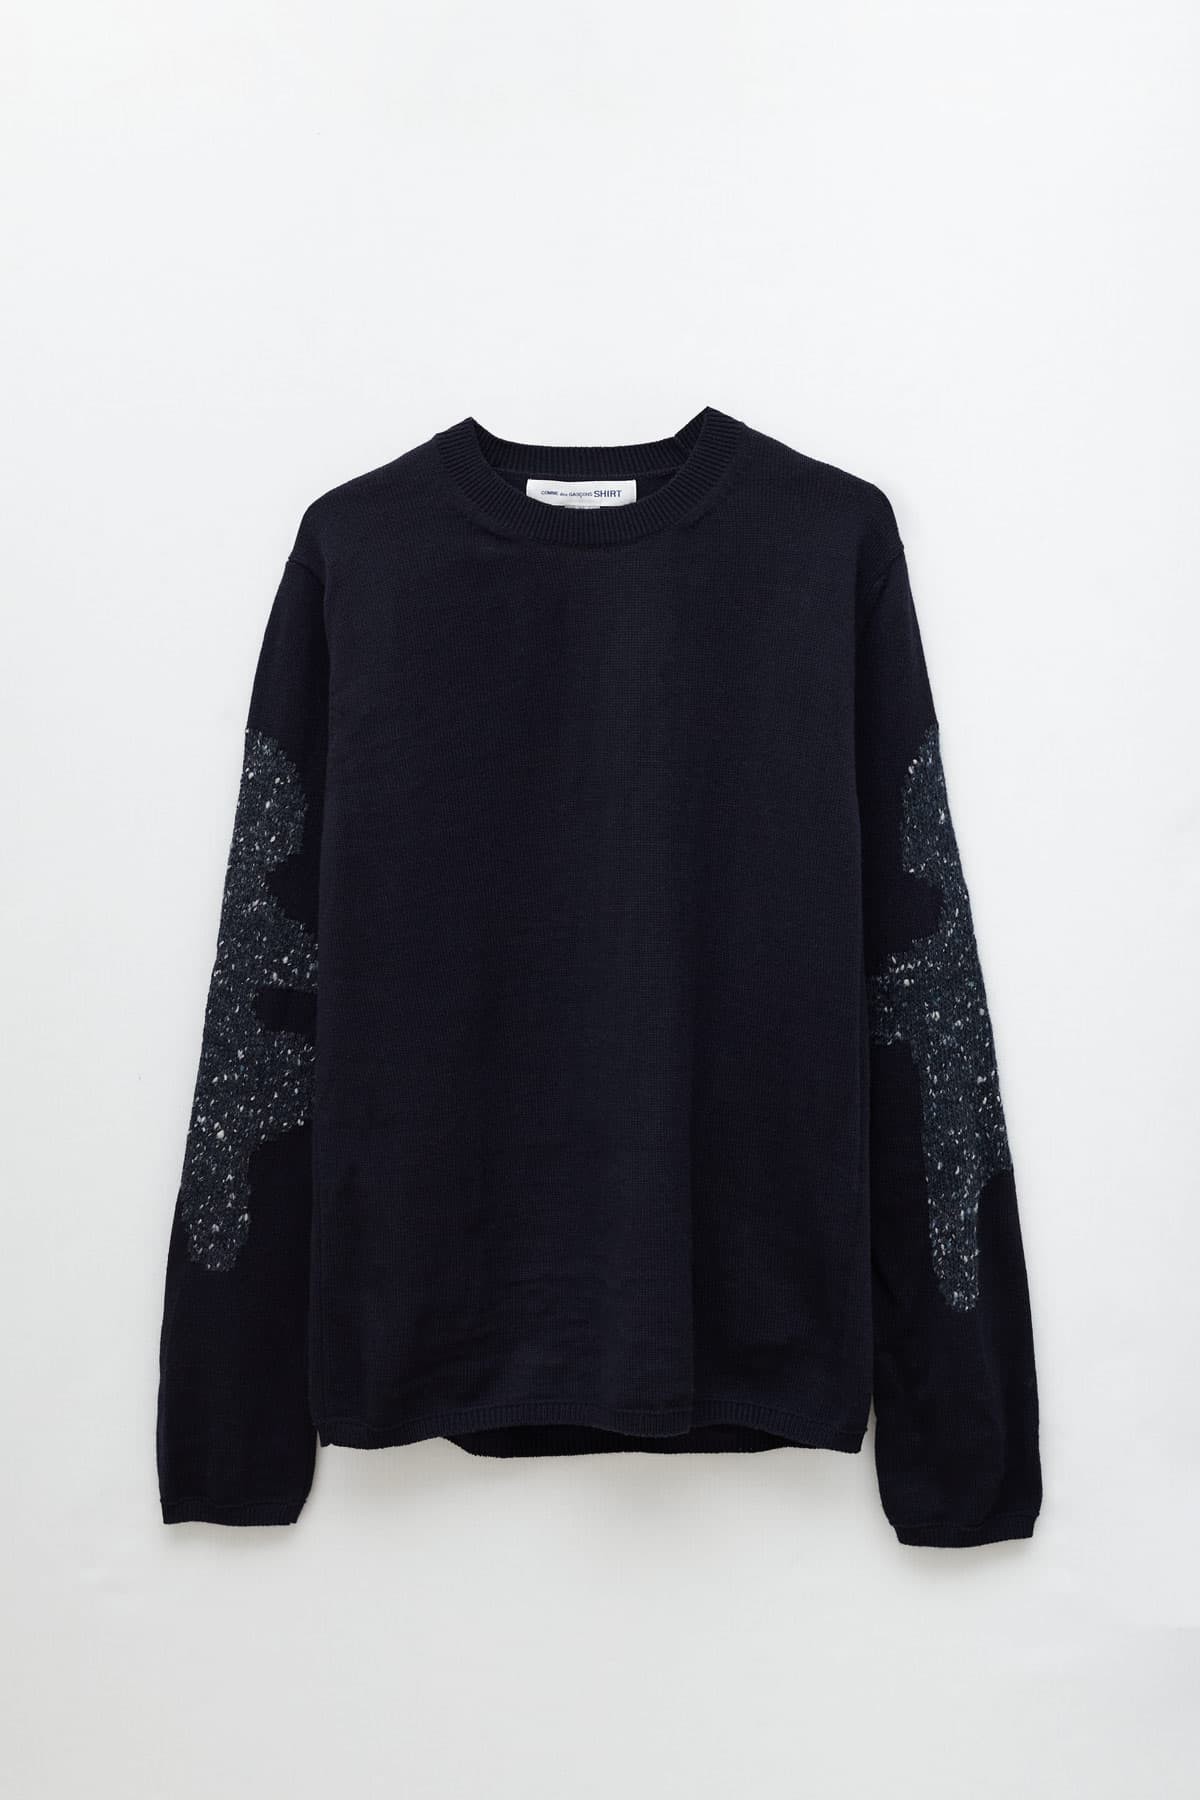 COMME DES GARCONS SHIRT NAVY SWEATER IAMNUE